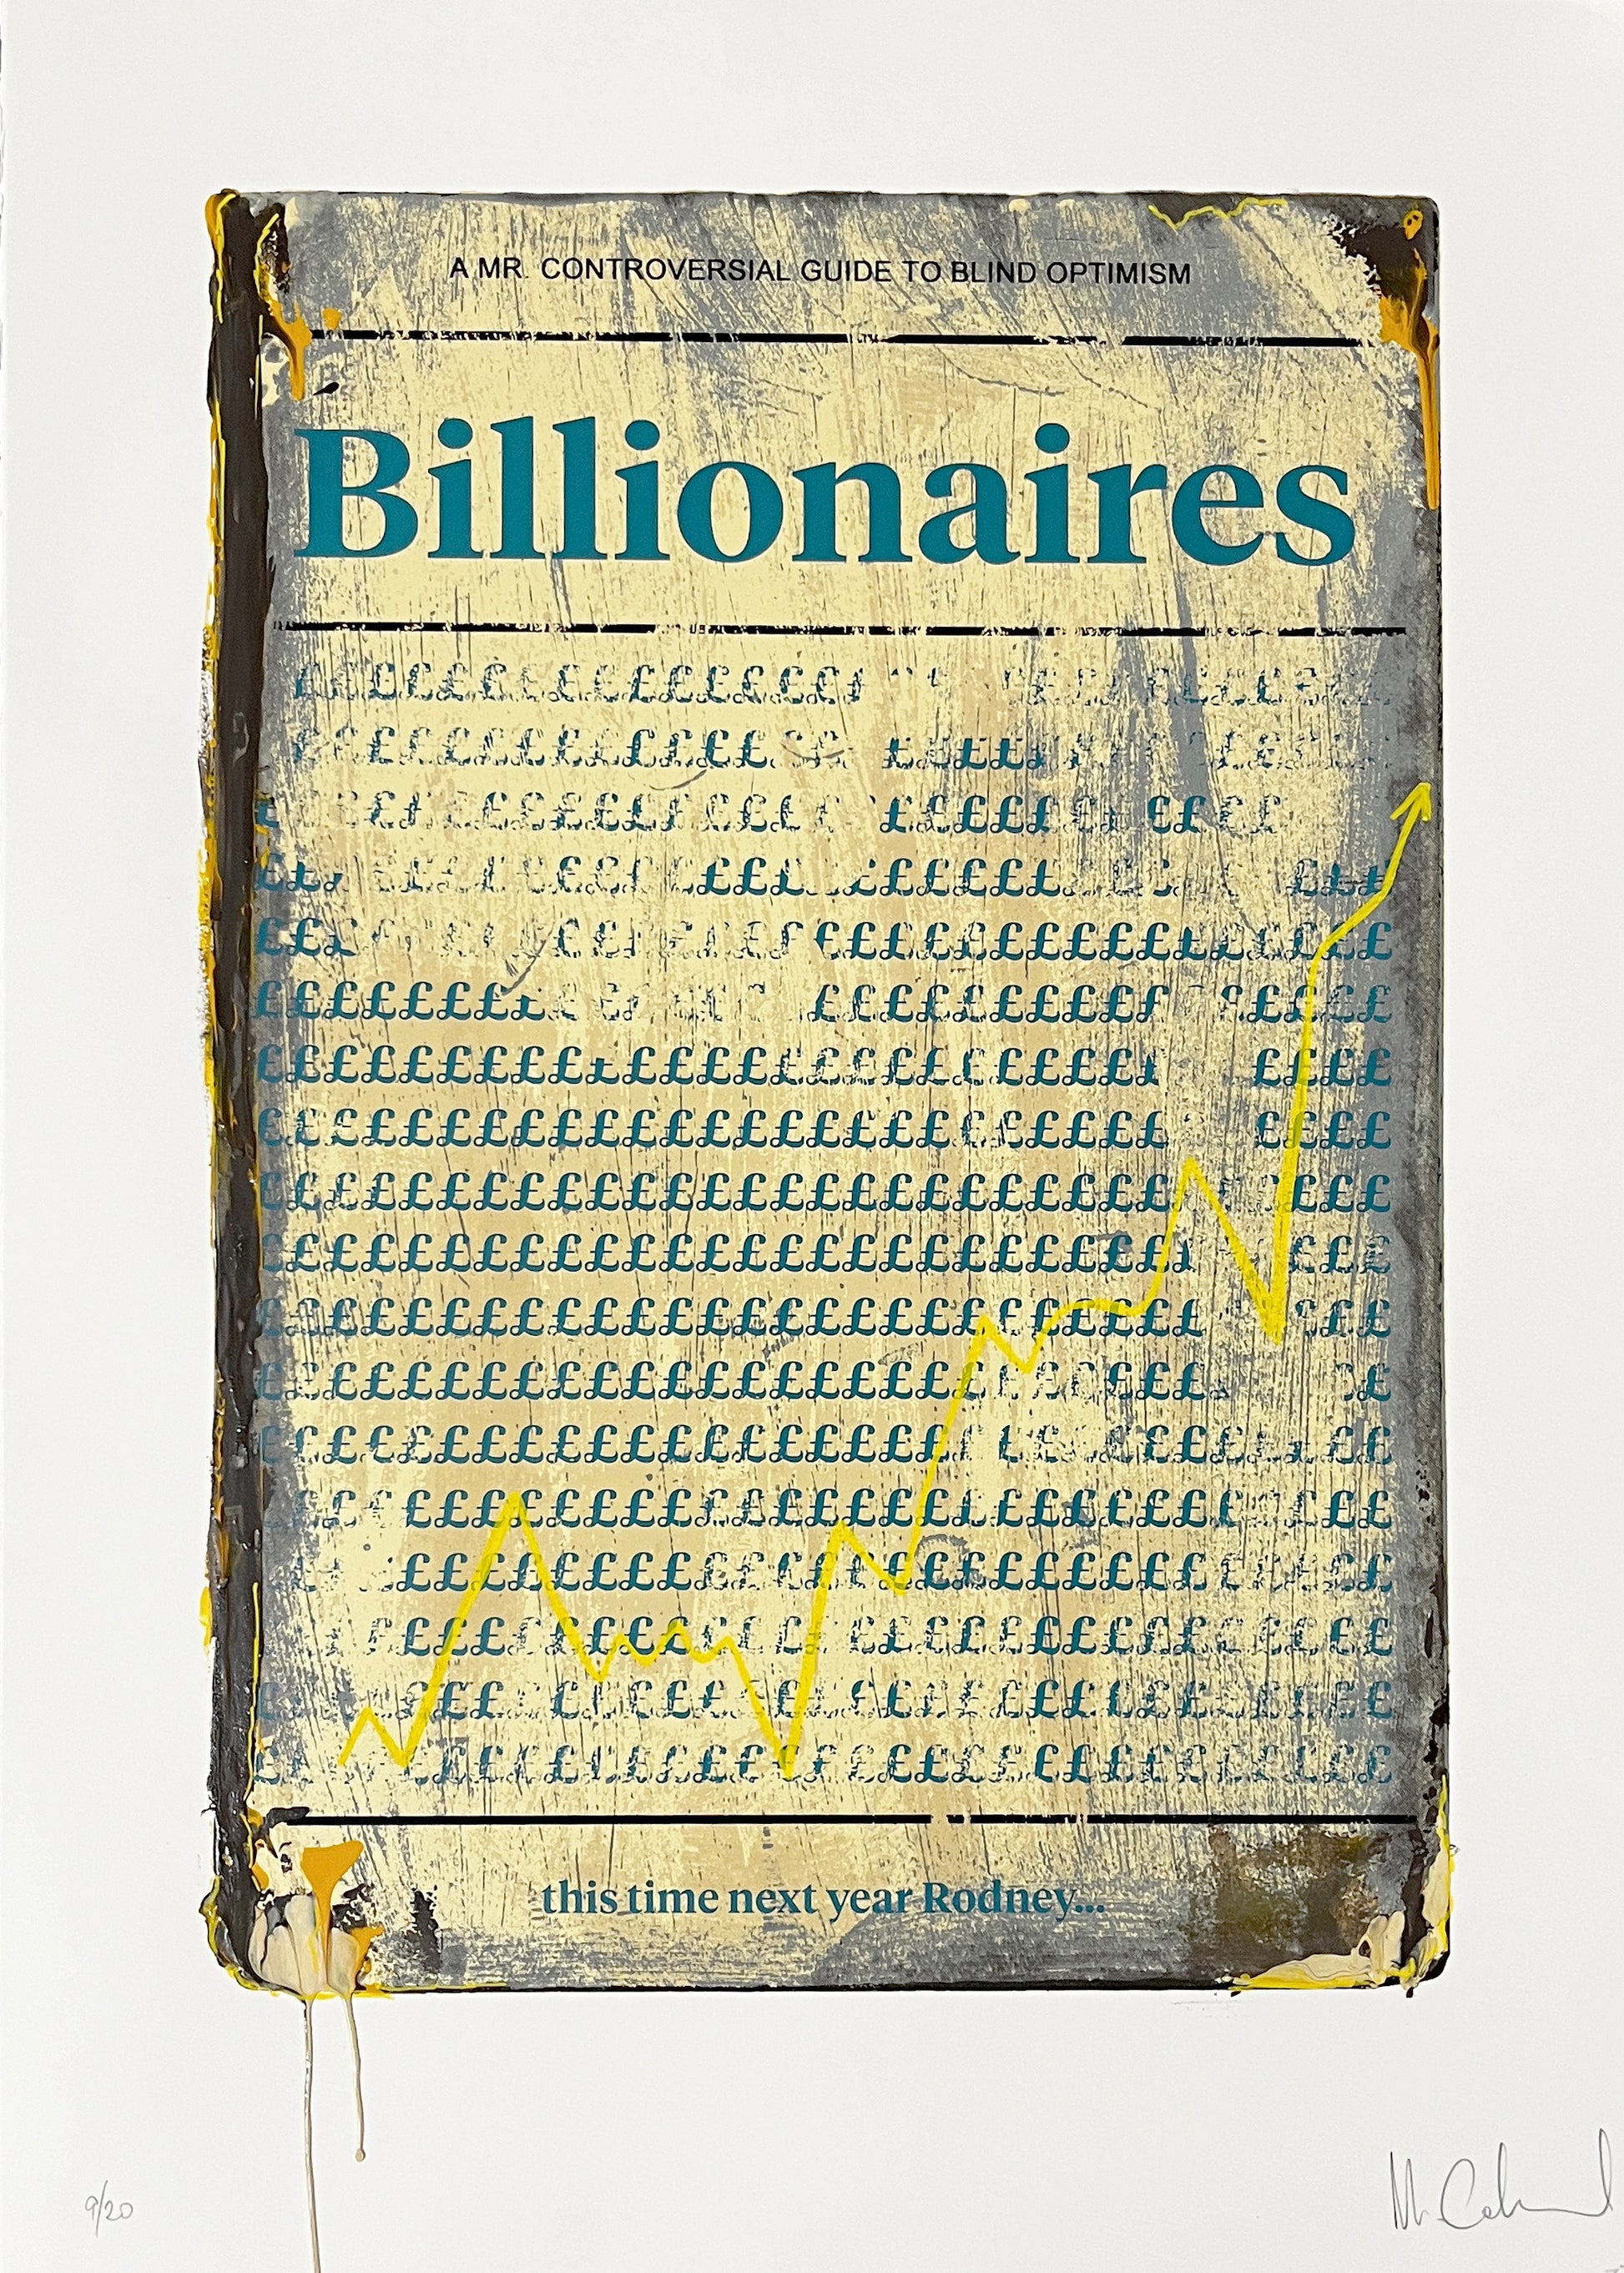 Mr Controversial, Artist, Billionaires, Edition 9 Hand-finished, Success, TAP Galleries, Essex Chelmsford Art Gallery 